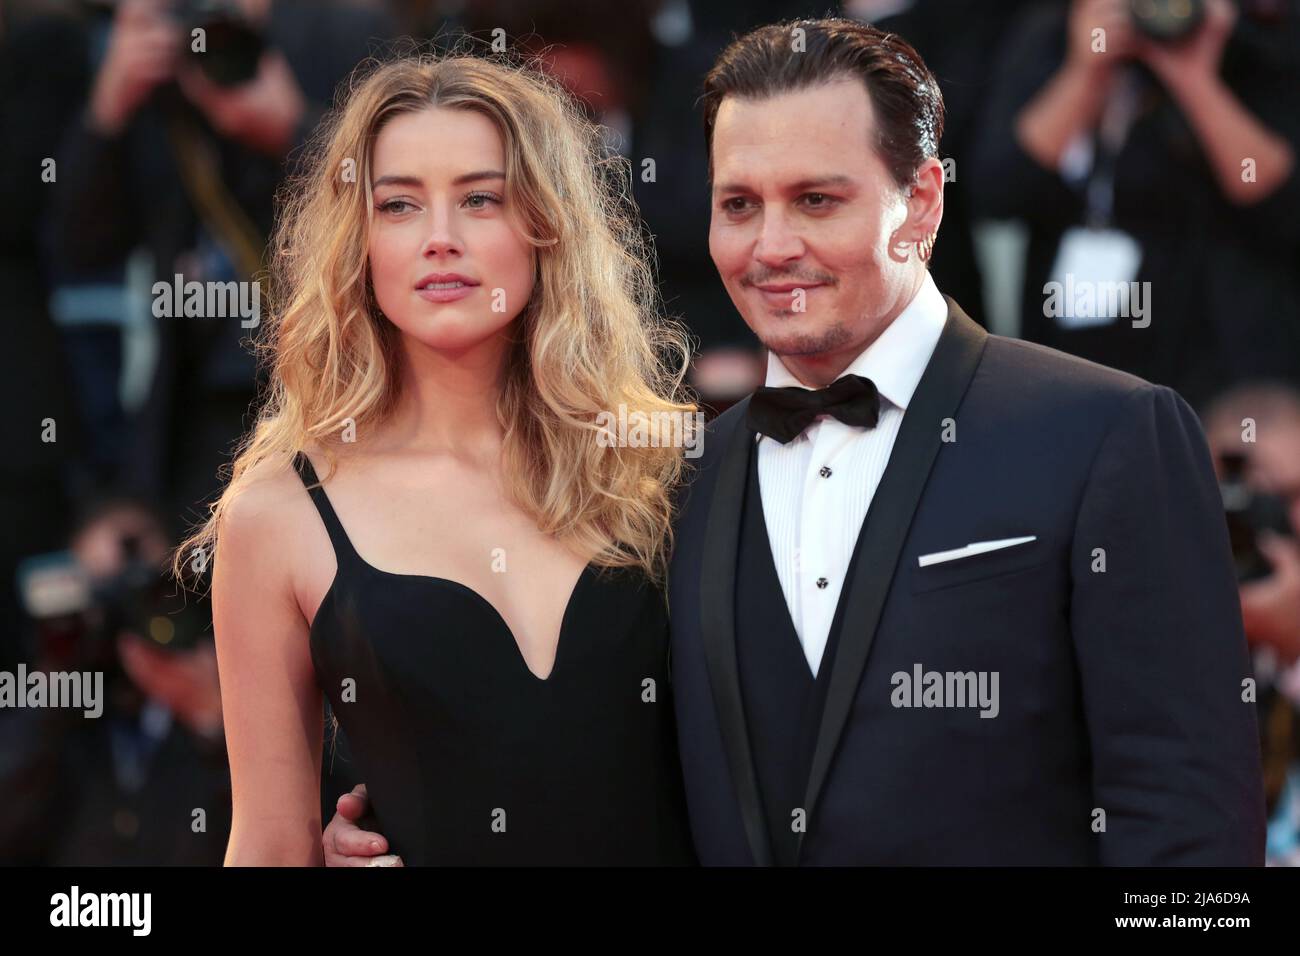 Actor Johnny Depp and his wife Amber Heard arrive for the red carpet event for the movie 'Black Mass' at the 72nd Venice Film Festival. Stock Photo